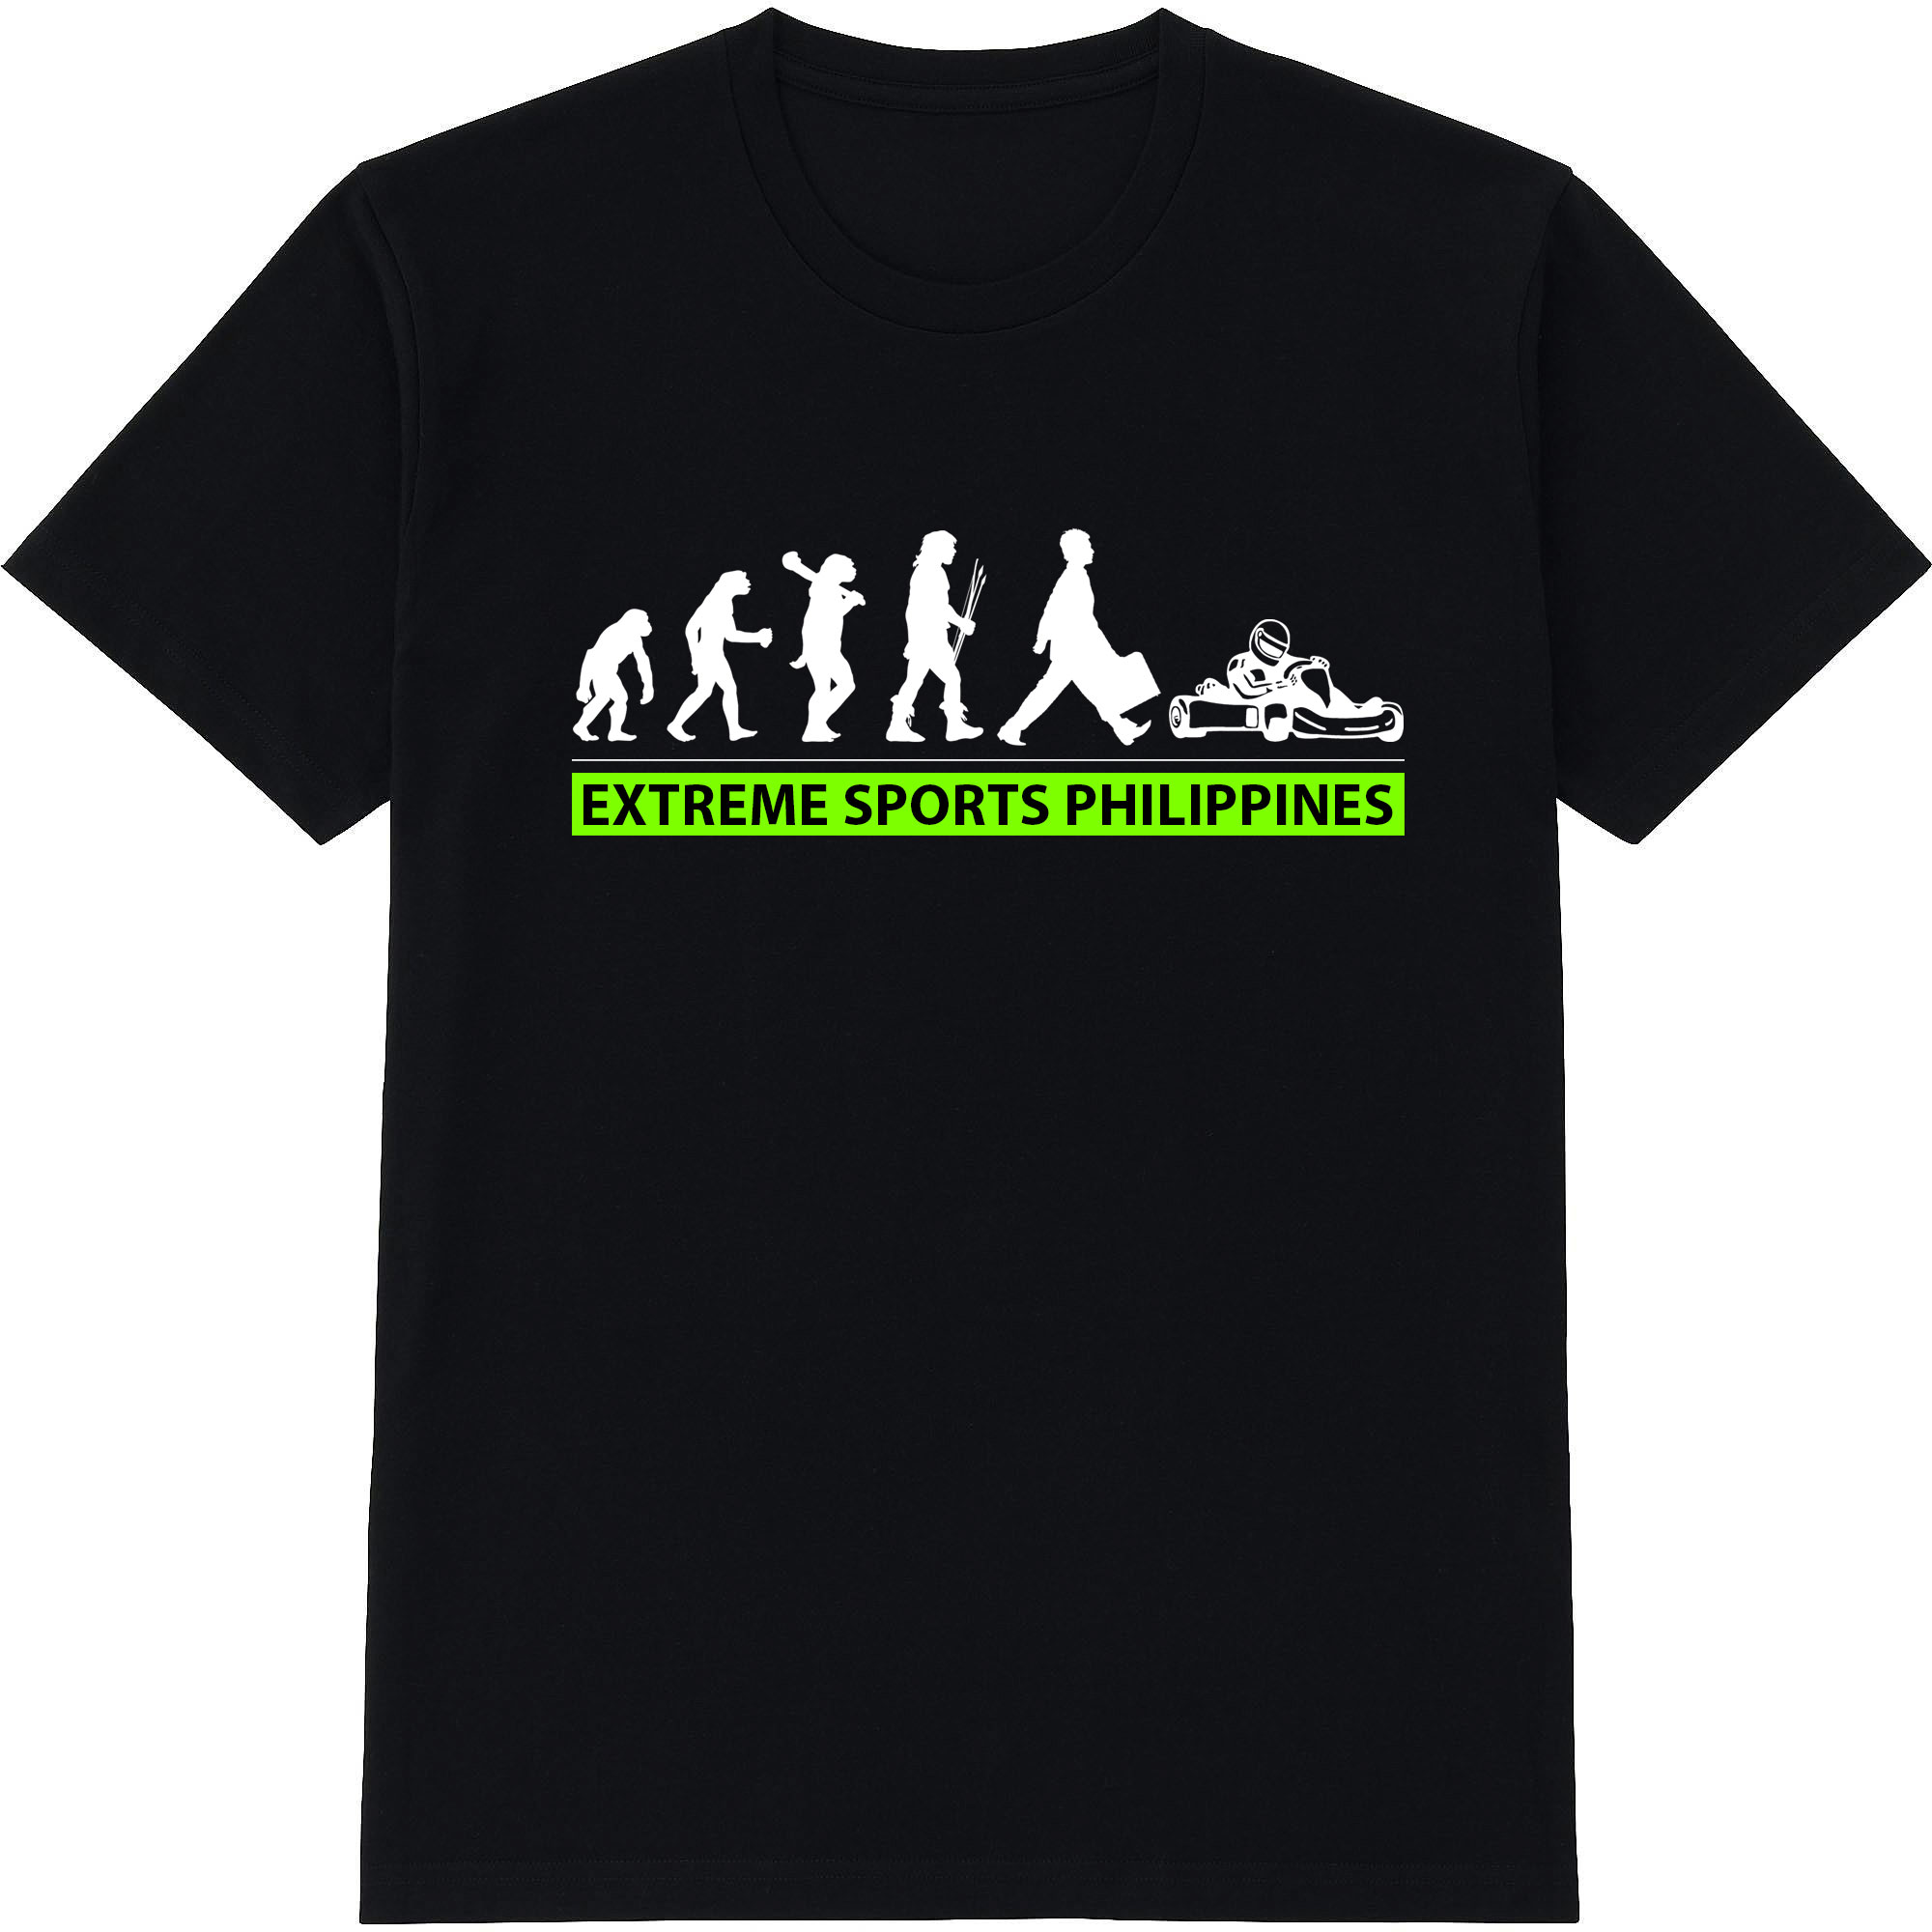 Get a free t-shirt in Extreme Sports Philippines adventure park in Puerto Galera.